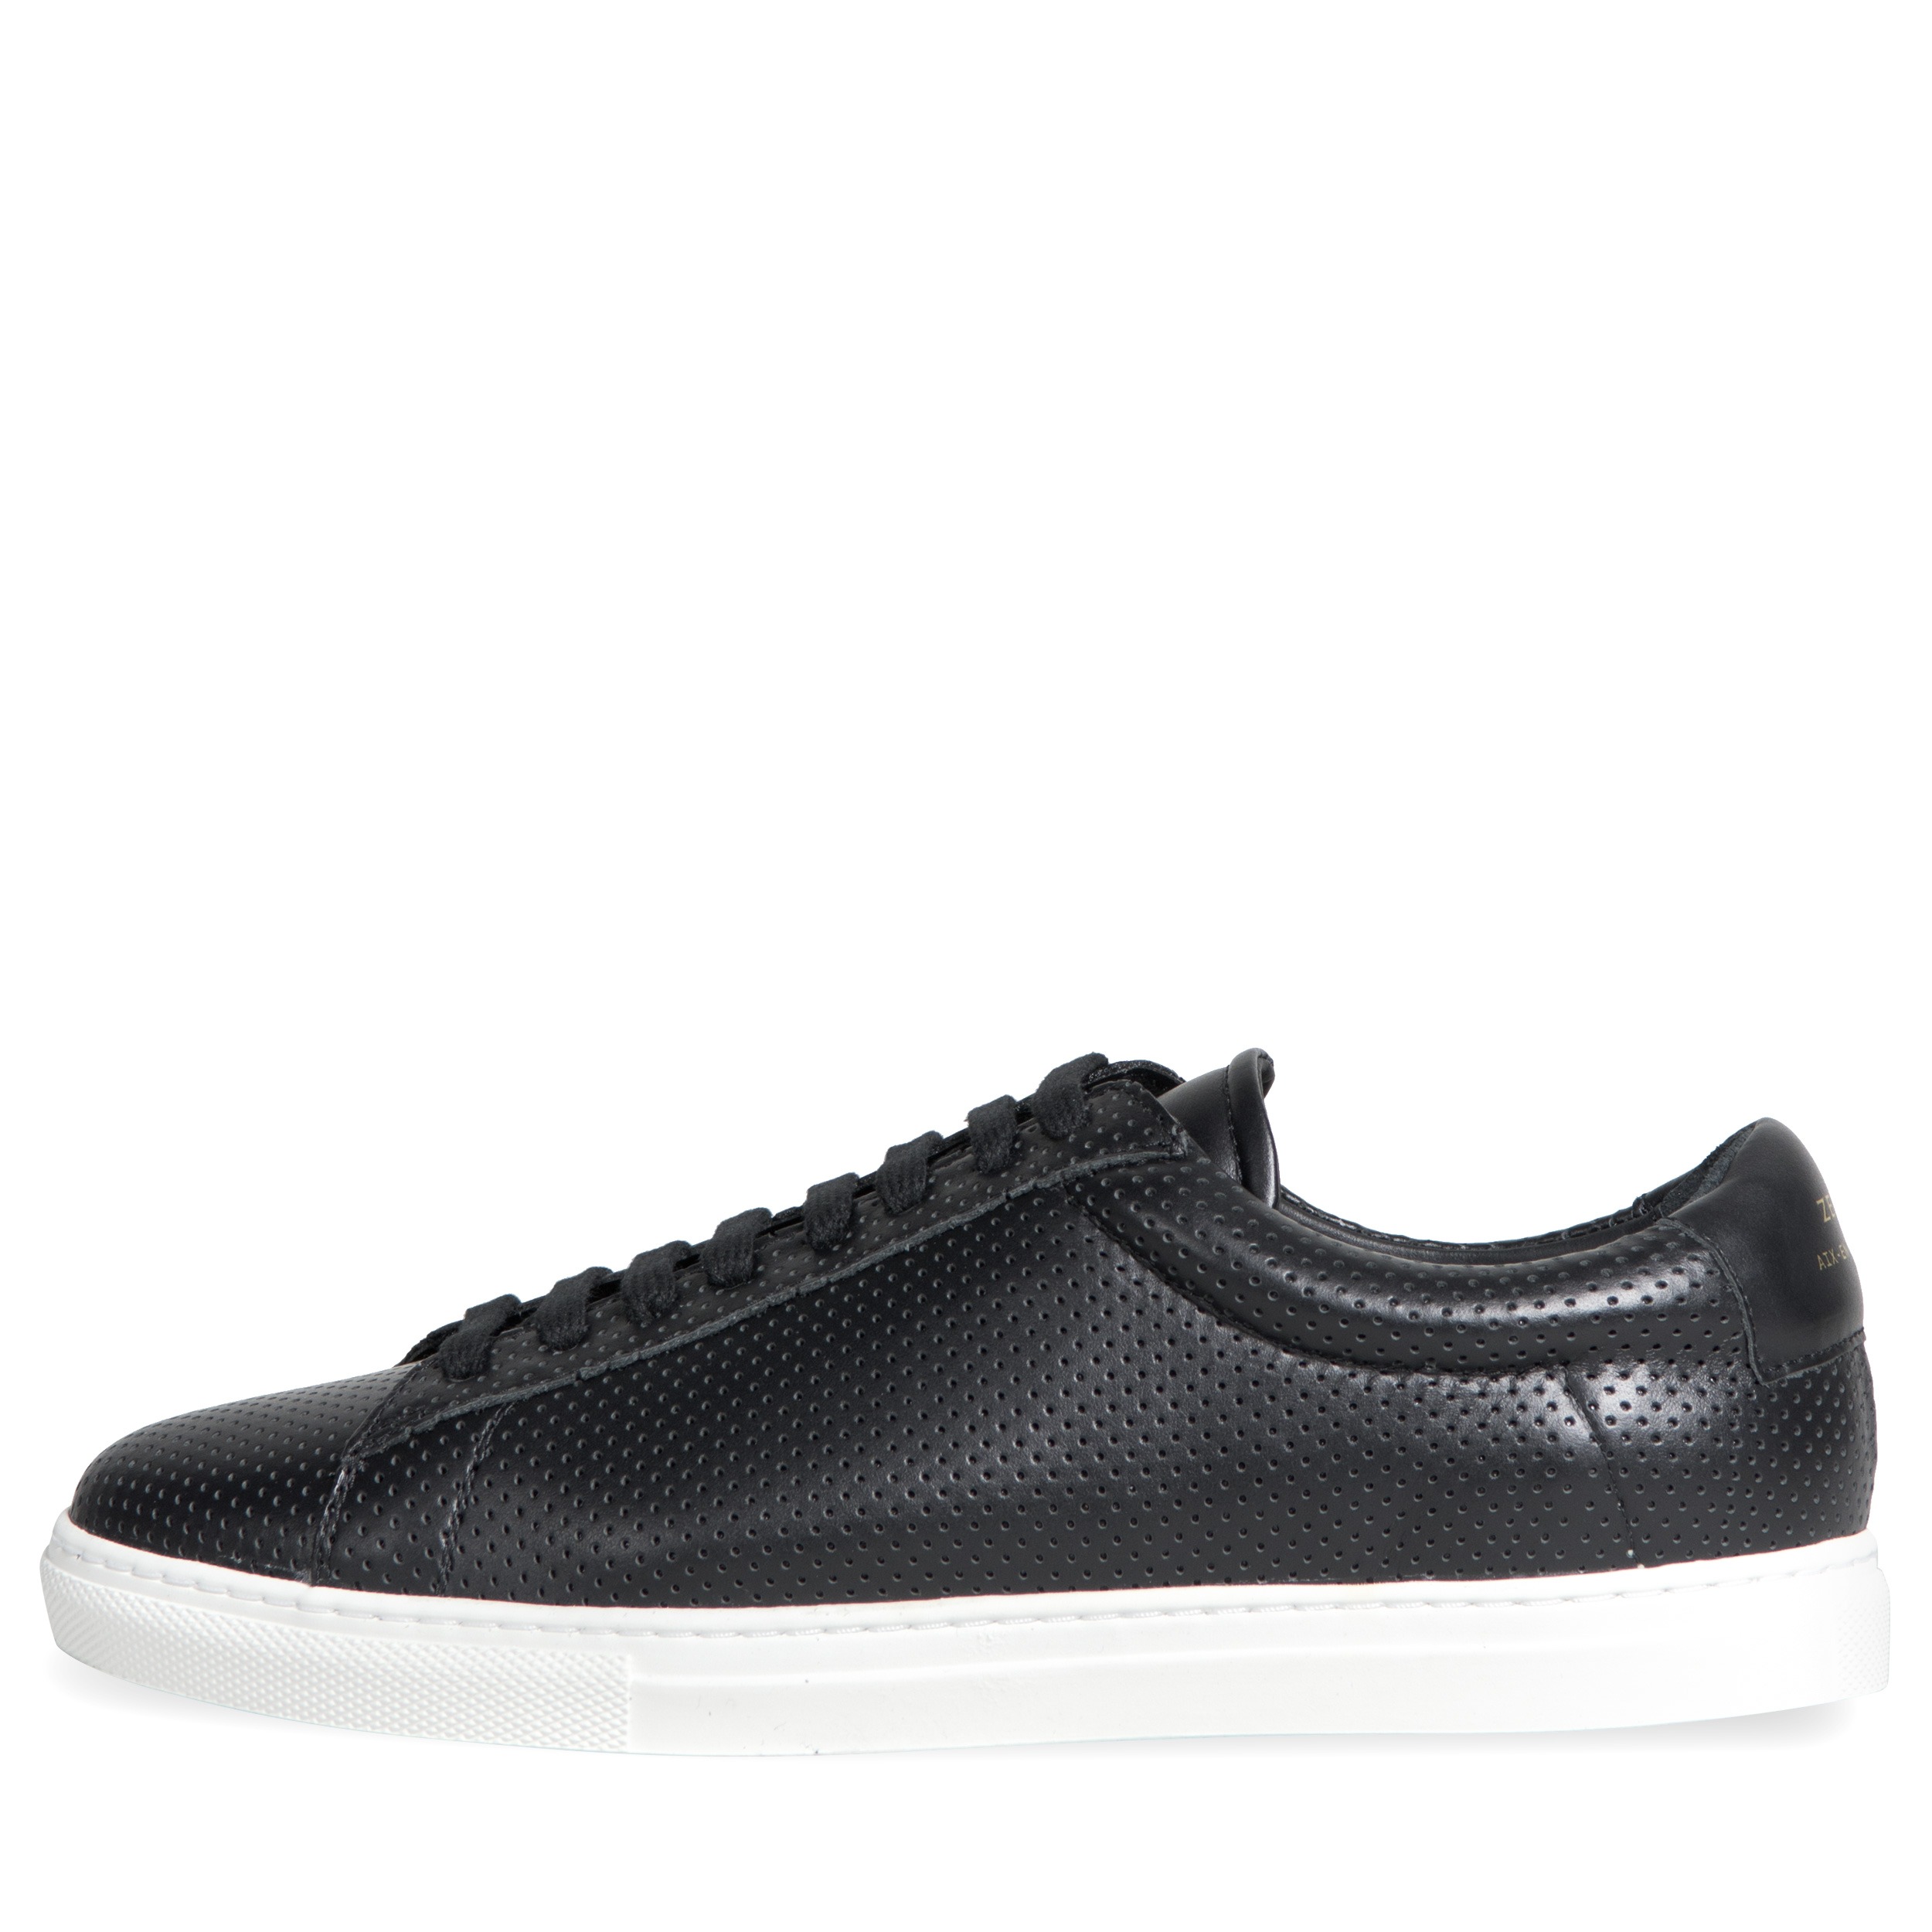 ZESPA 'ZSP4' Nappa Perforated Leather Trainer Black